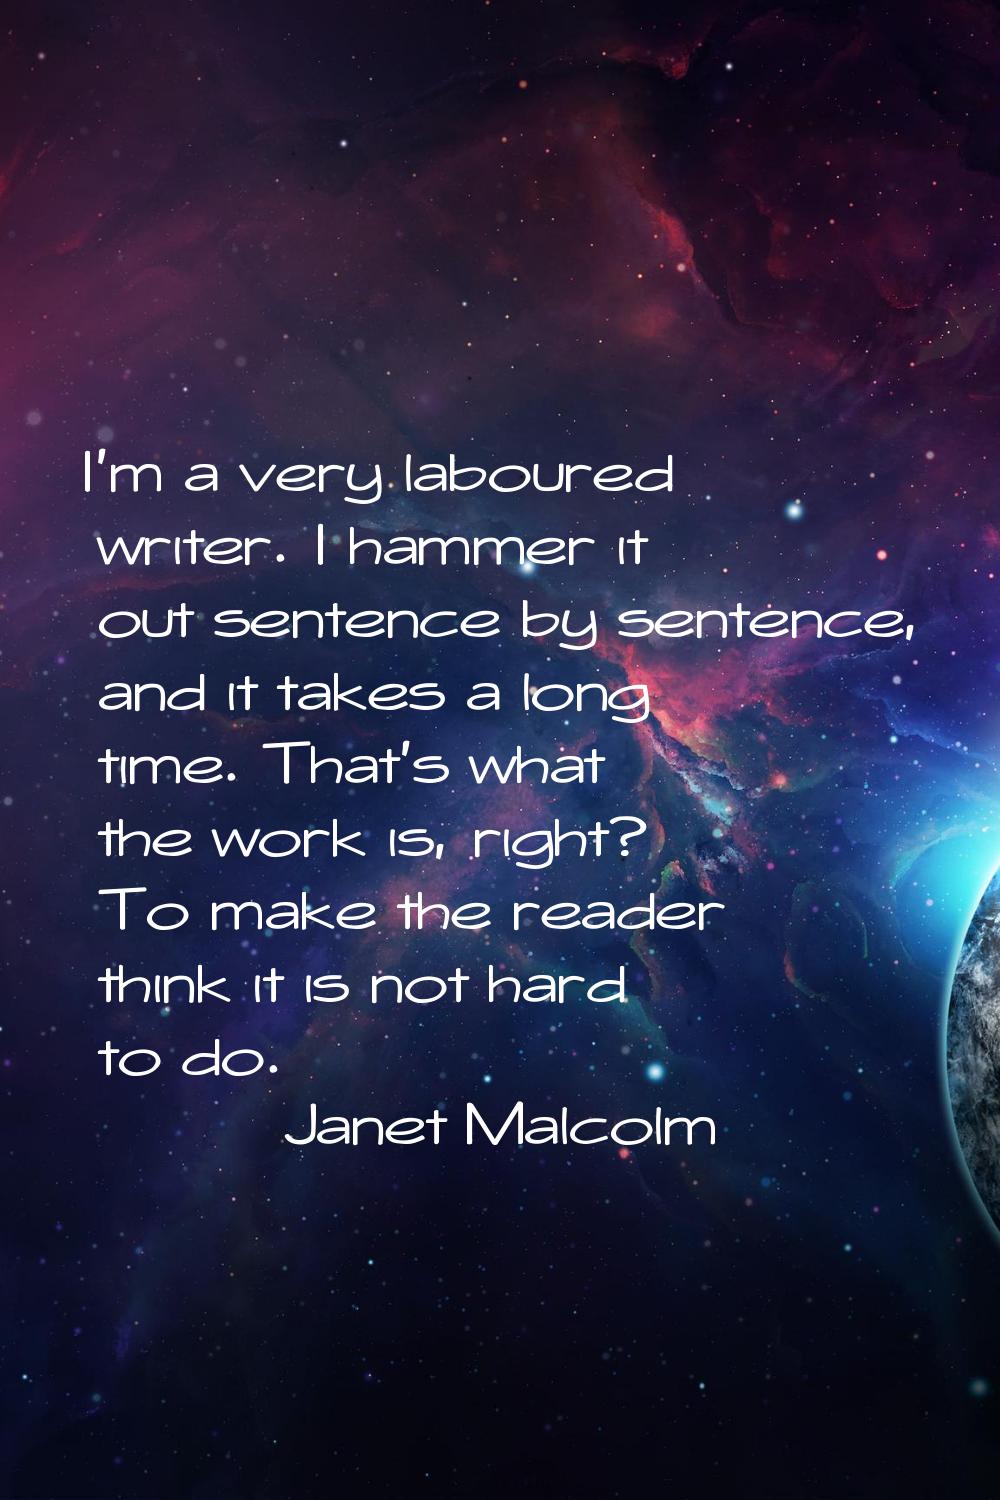 I'm a very laboured writer. I hammer it out sentence by sentence, and it takes a long time. That's 